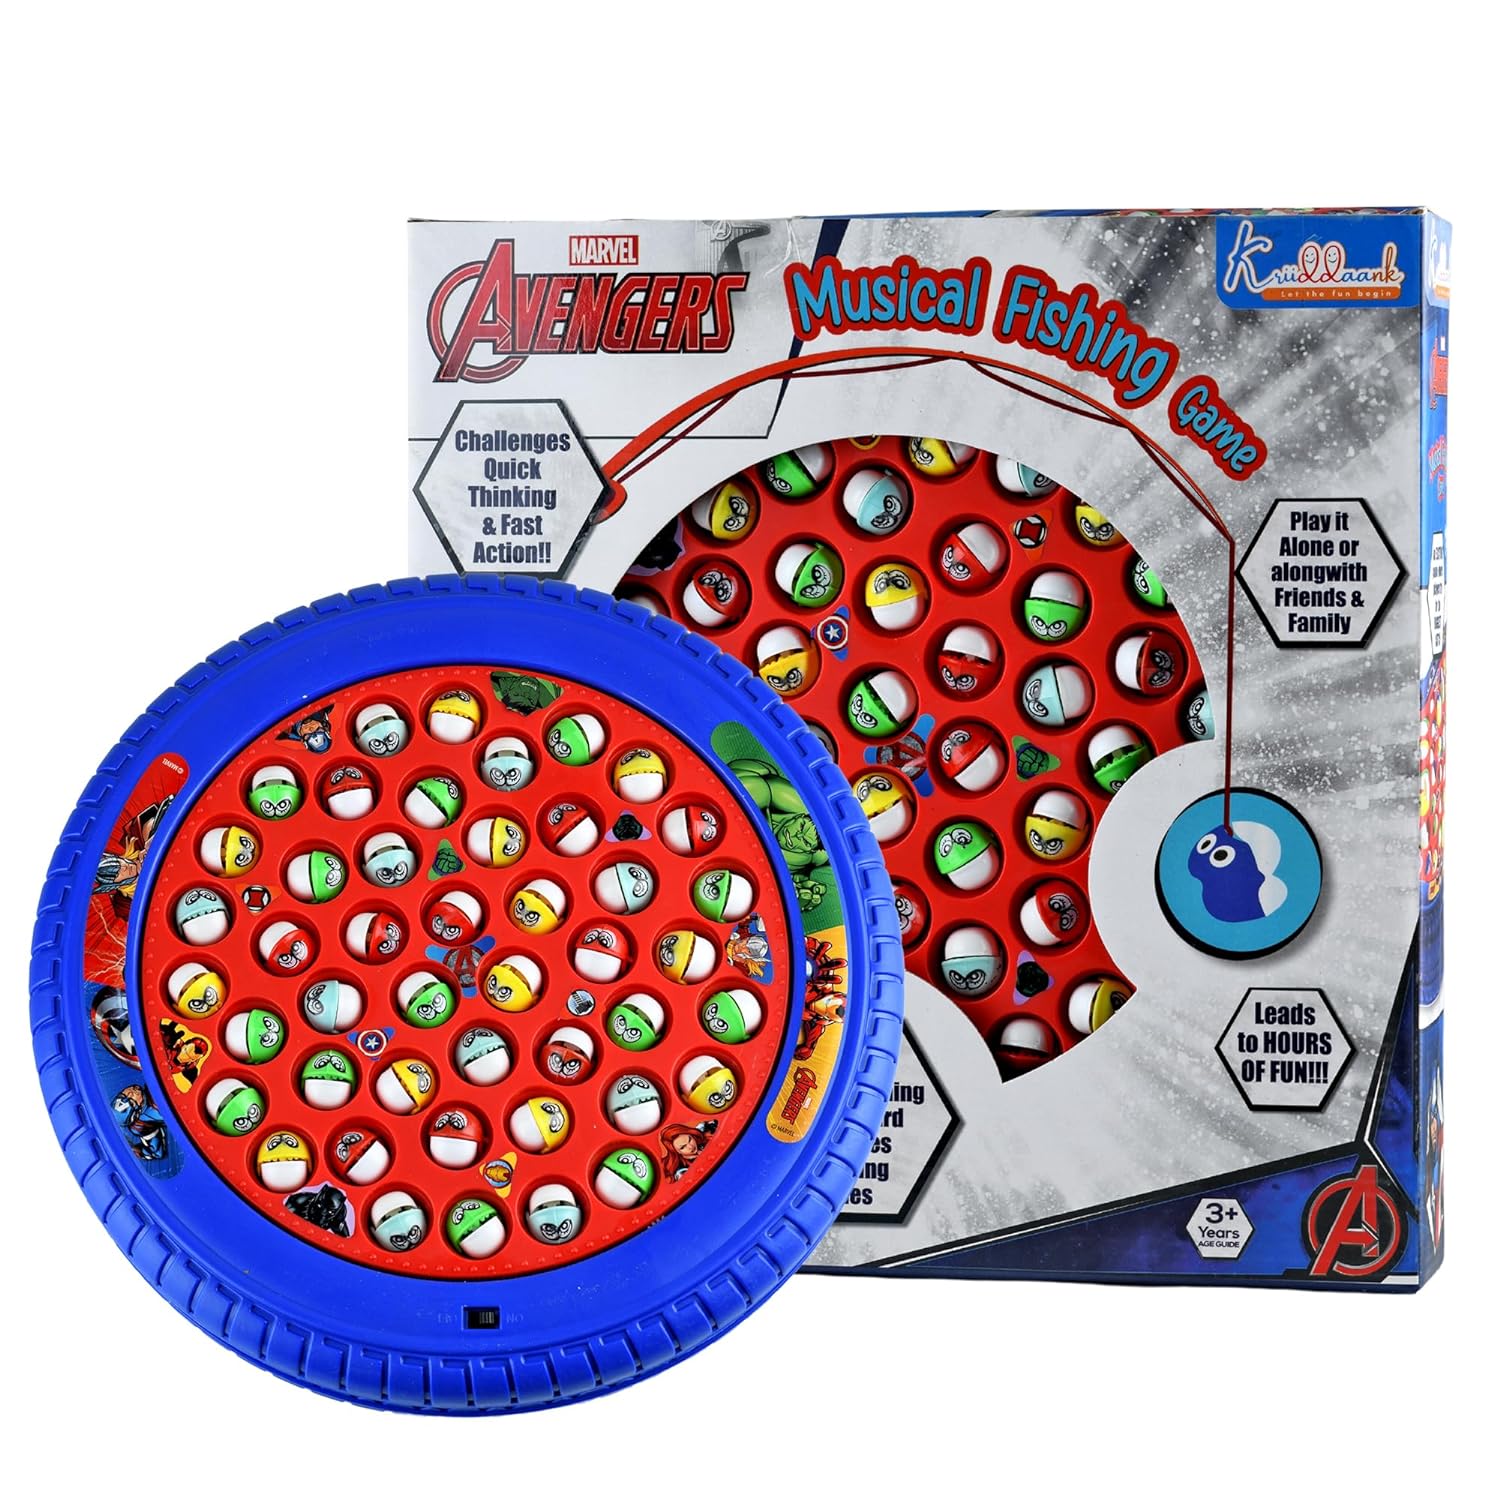 Marvel Avenger Musical Fishing Game Fish Catching Board Game Toy 45 Fishes with Big Round Pond & 4 Fish Catching Sticks for Kids (Blue)